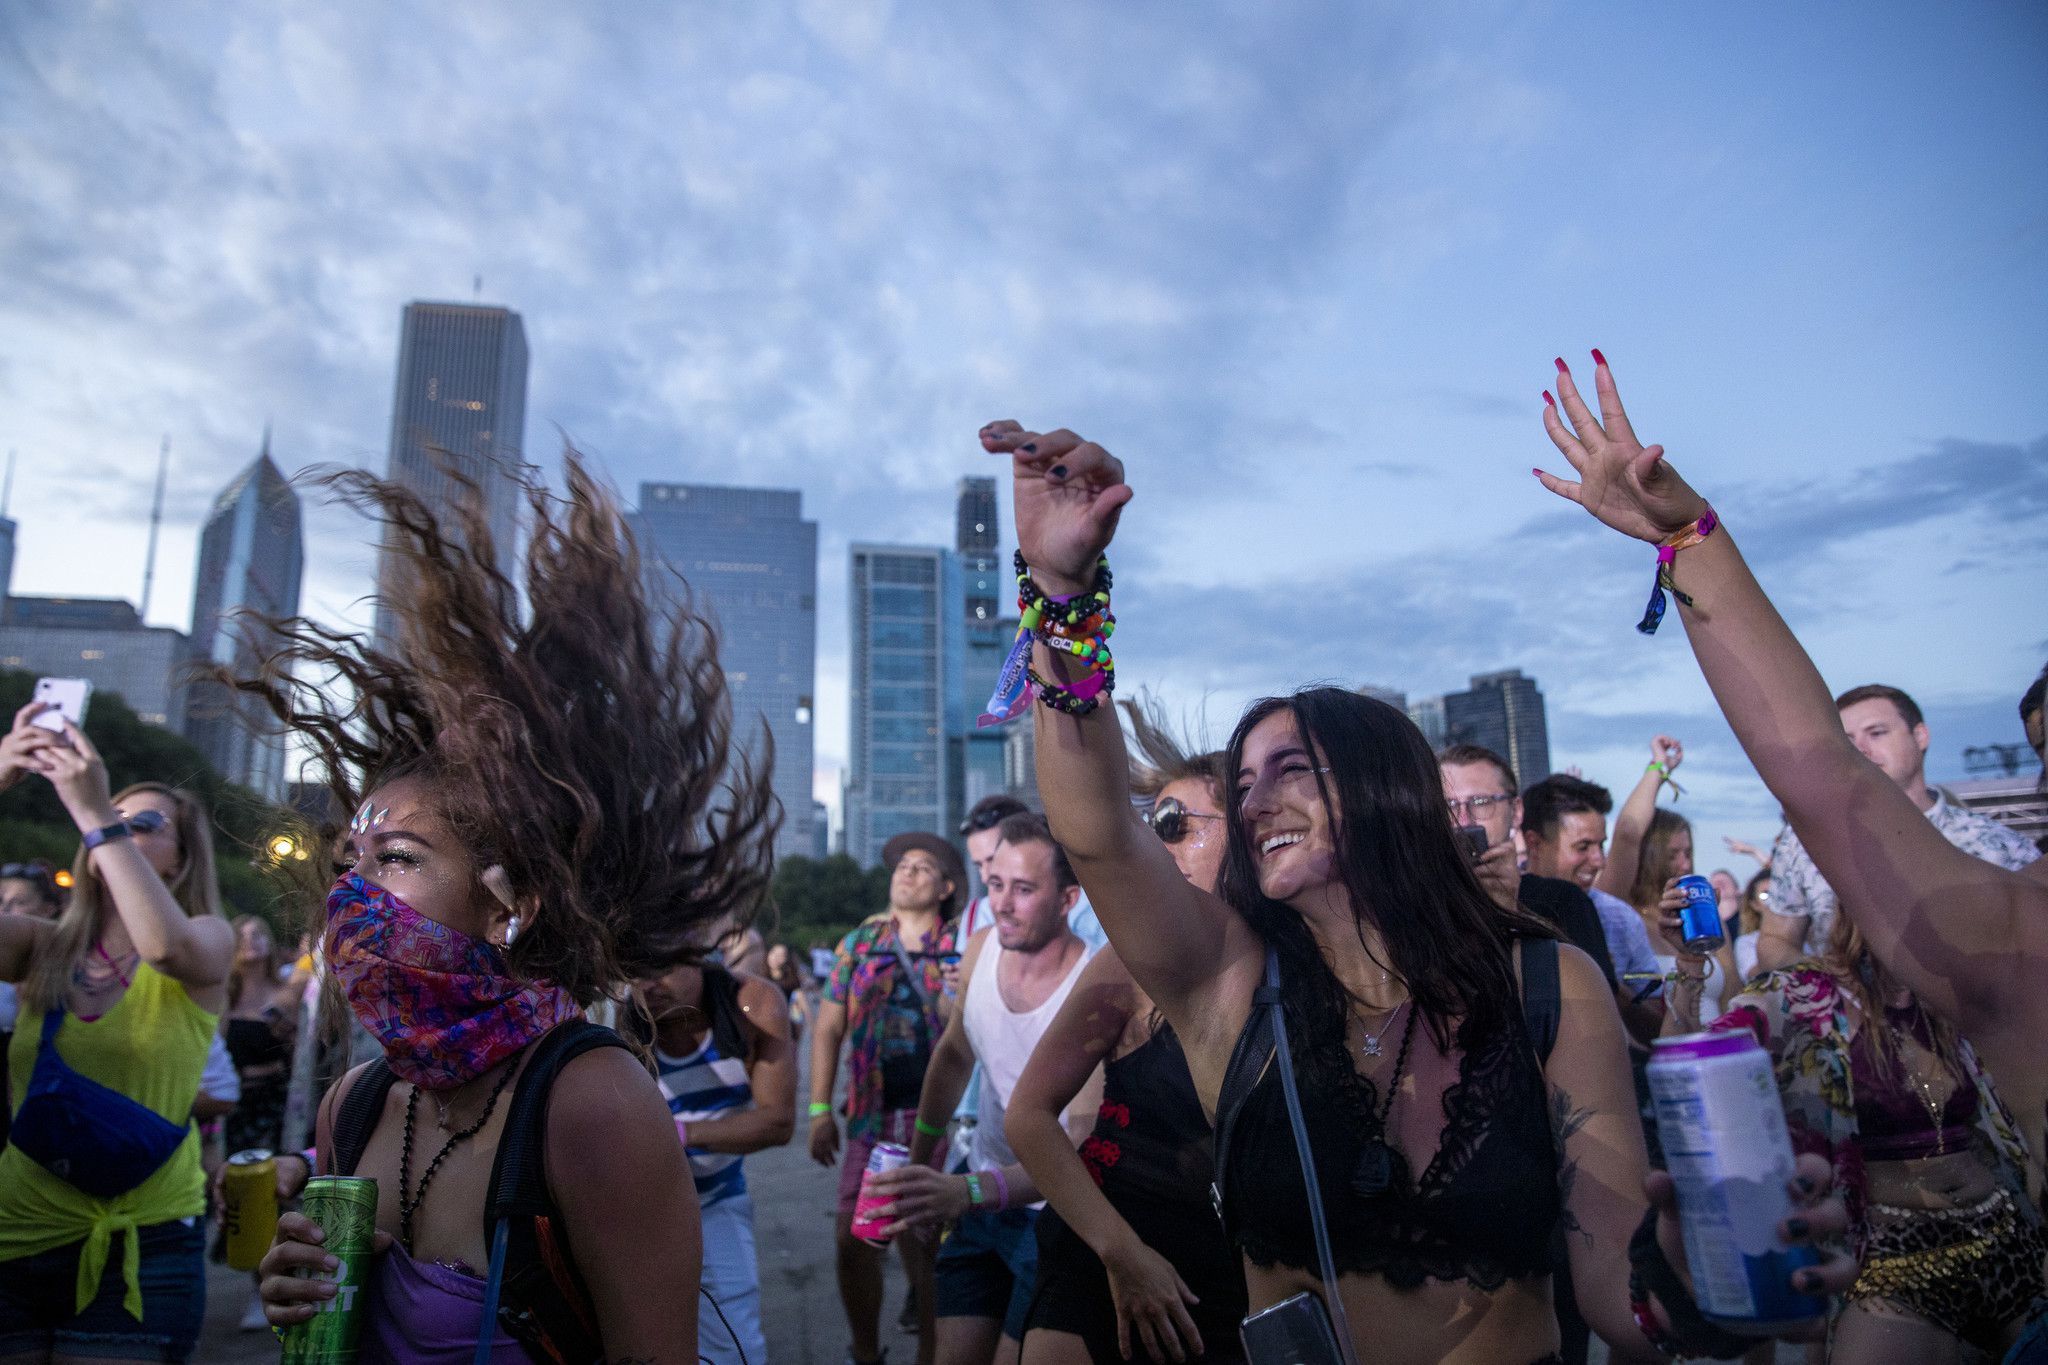 Lollapalooza: why the Chicago music festival is a cut above the rest, Music festivals